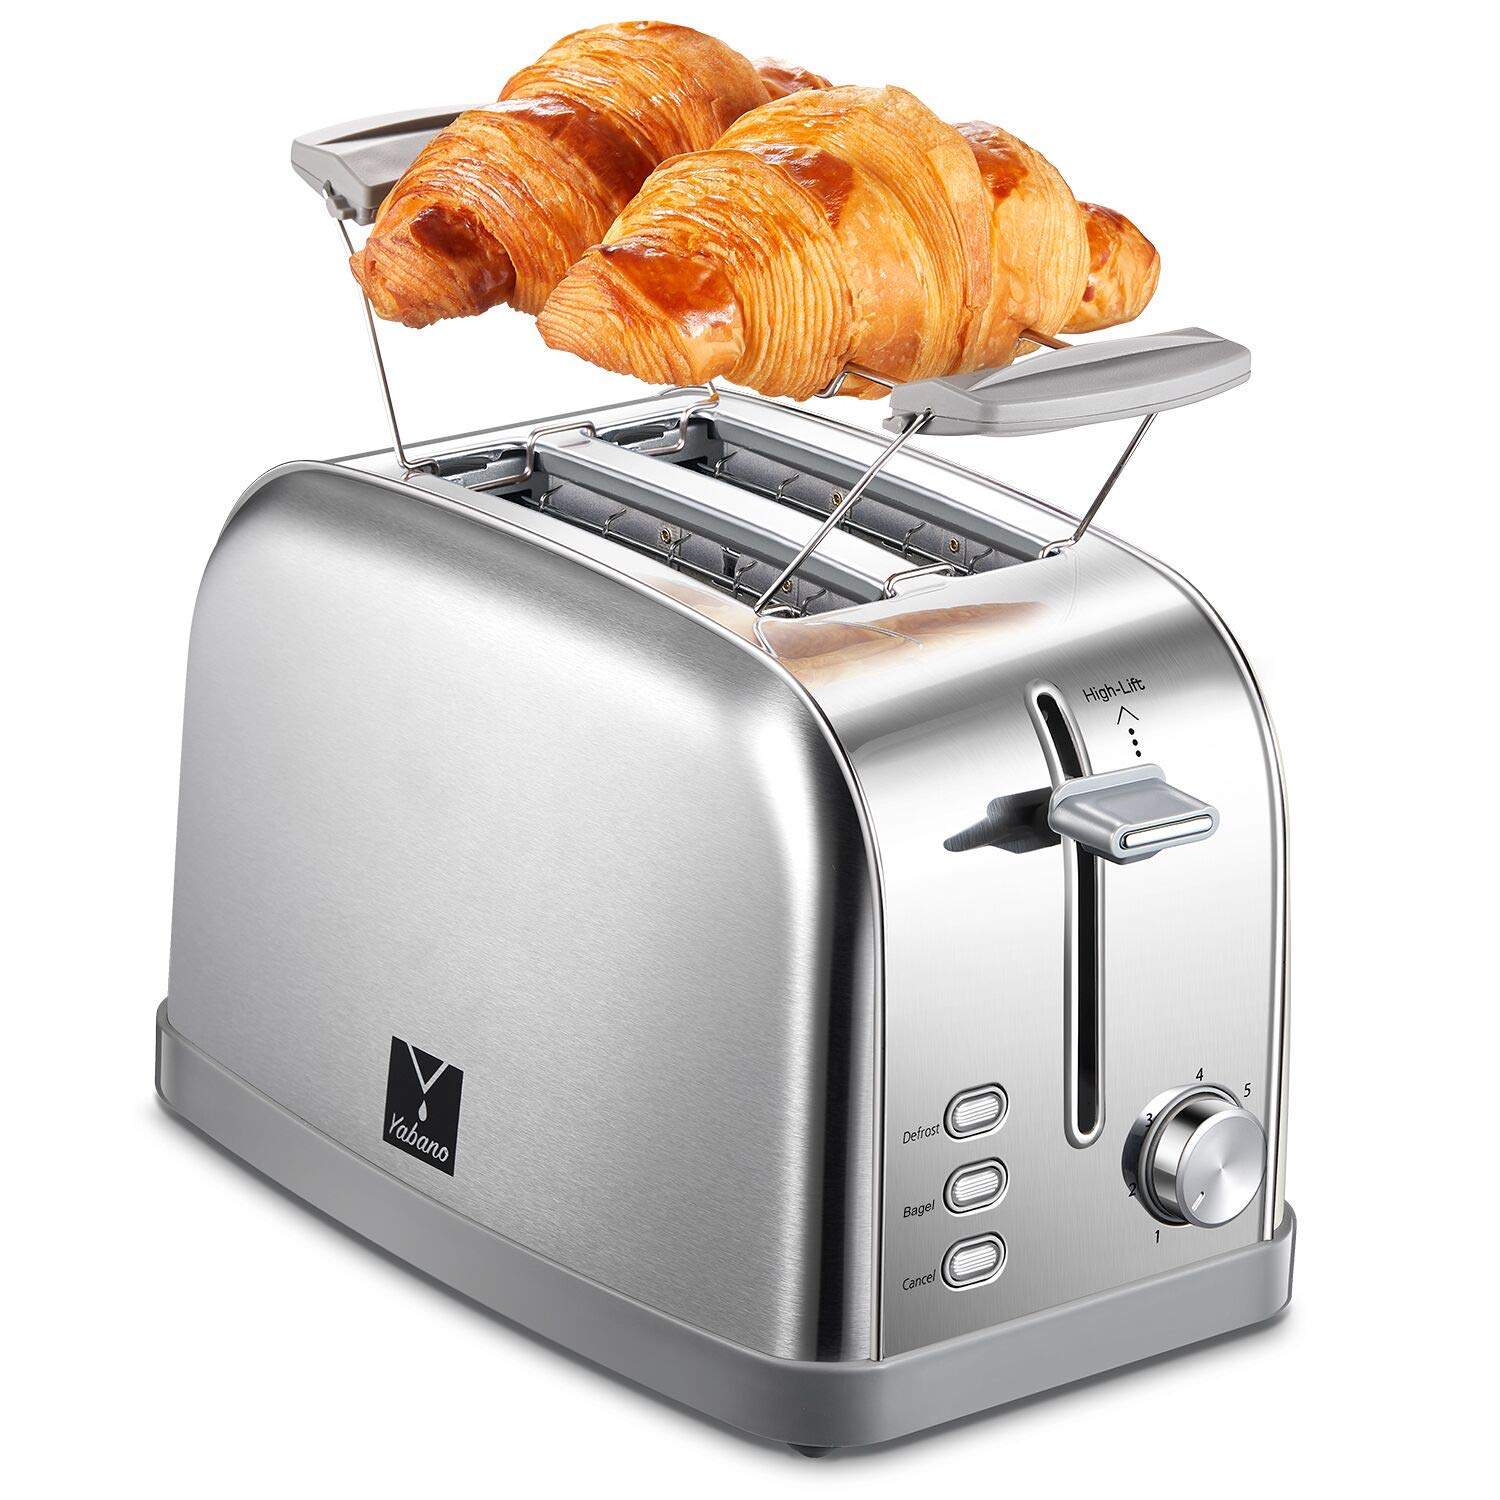 Yabano 2 Slice Toaster, Retro Bagel Toaster Toaster with 7 Bread Shade Settings, 2 Extra Wide Slots, DefrostBagelcancel Function, Remov